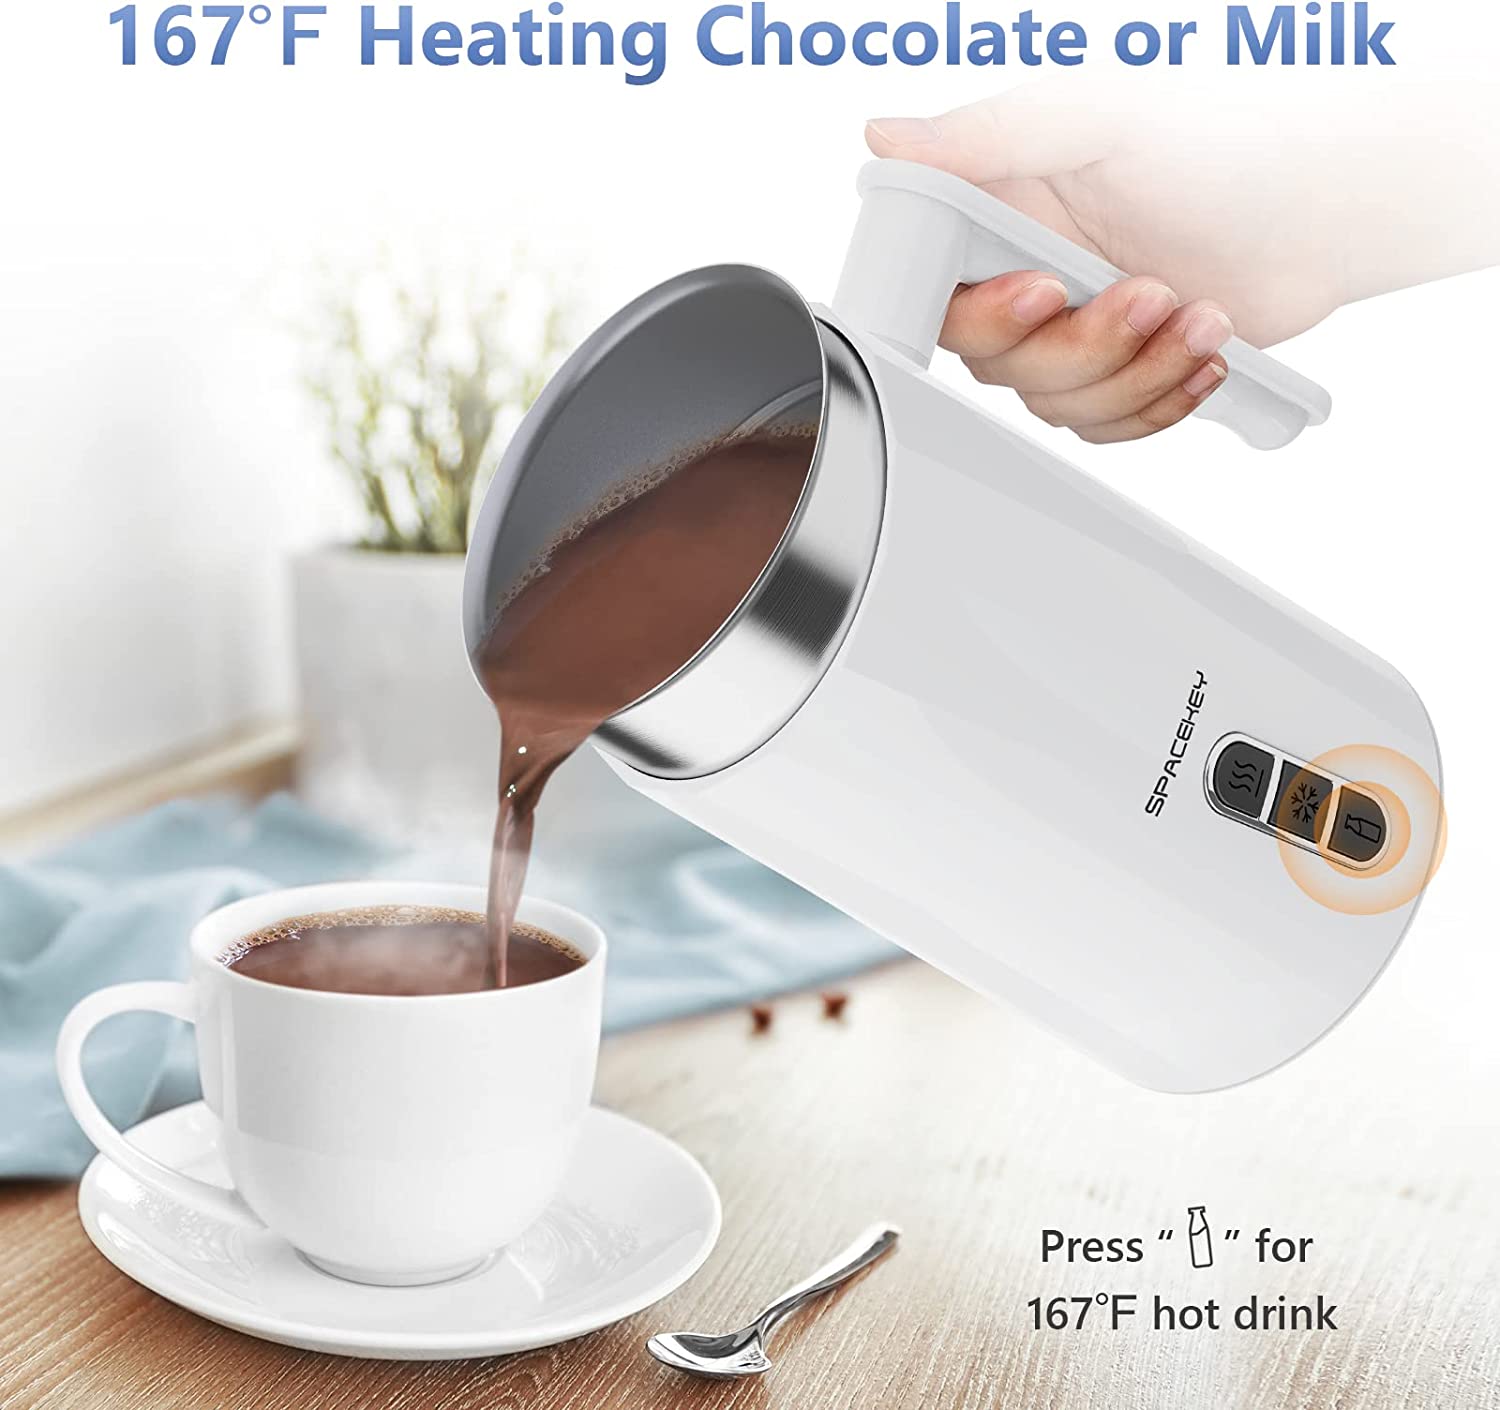 Milk Frother,4-in-1 Electric Frother for Coffee,Spacekey 10.1oz Milk Frother and Steamer,Milk Warmer Heats up to 167℉